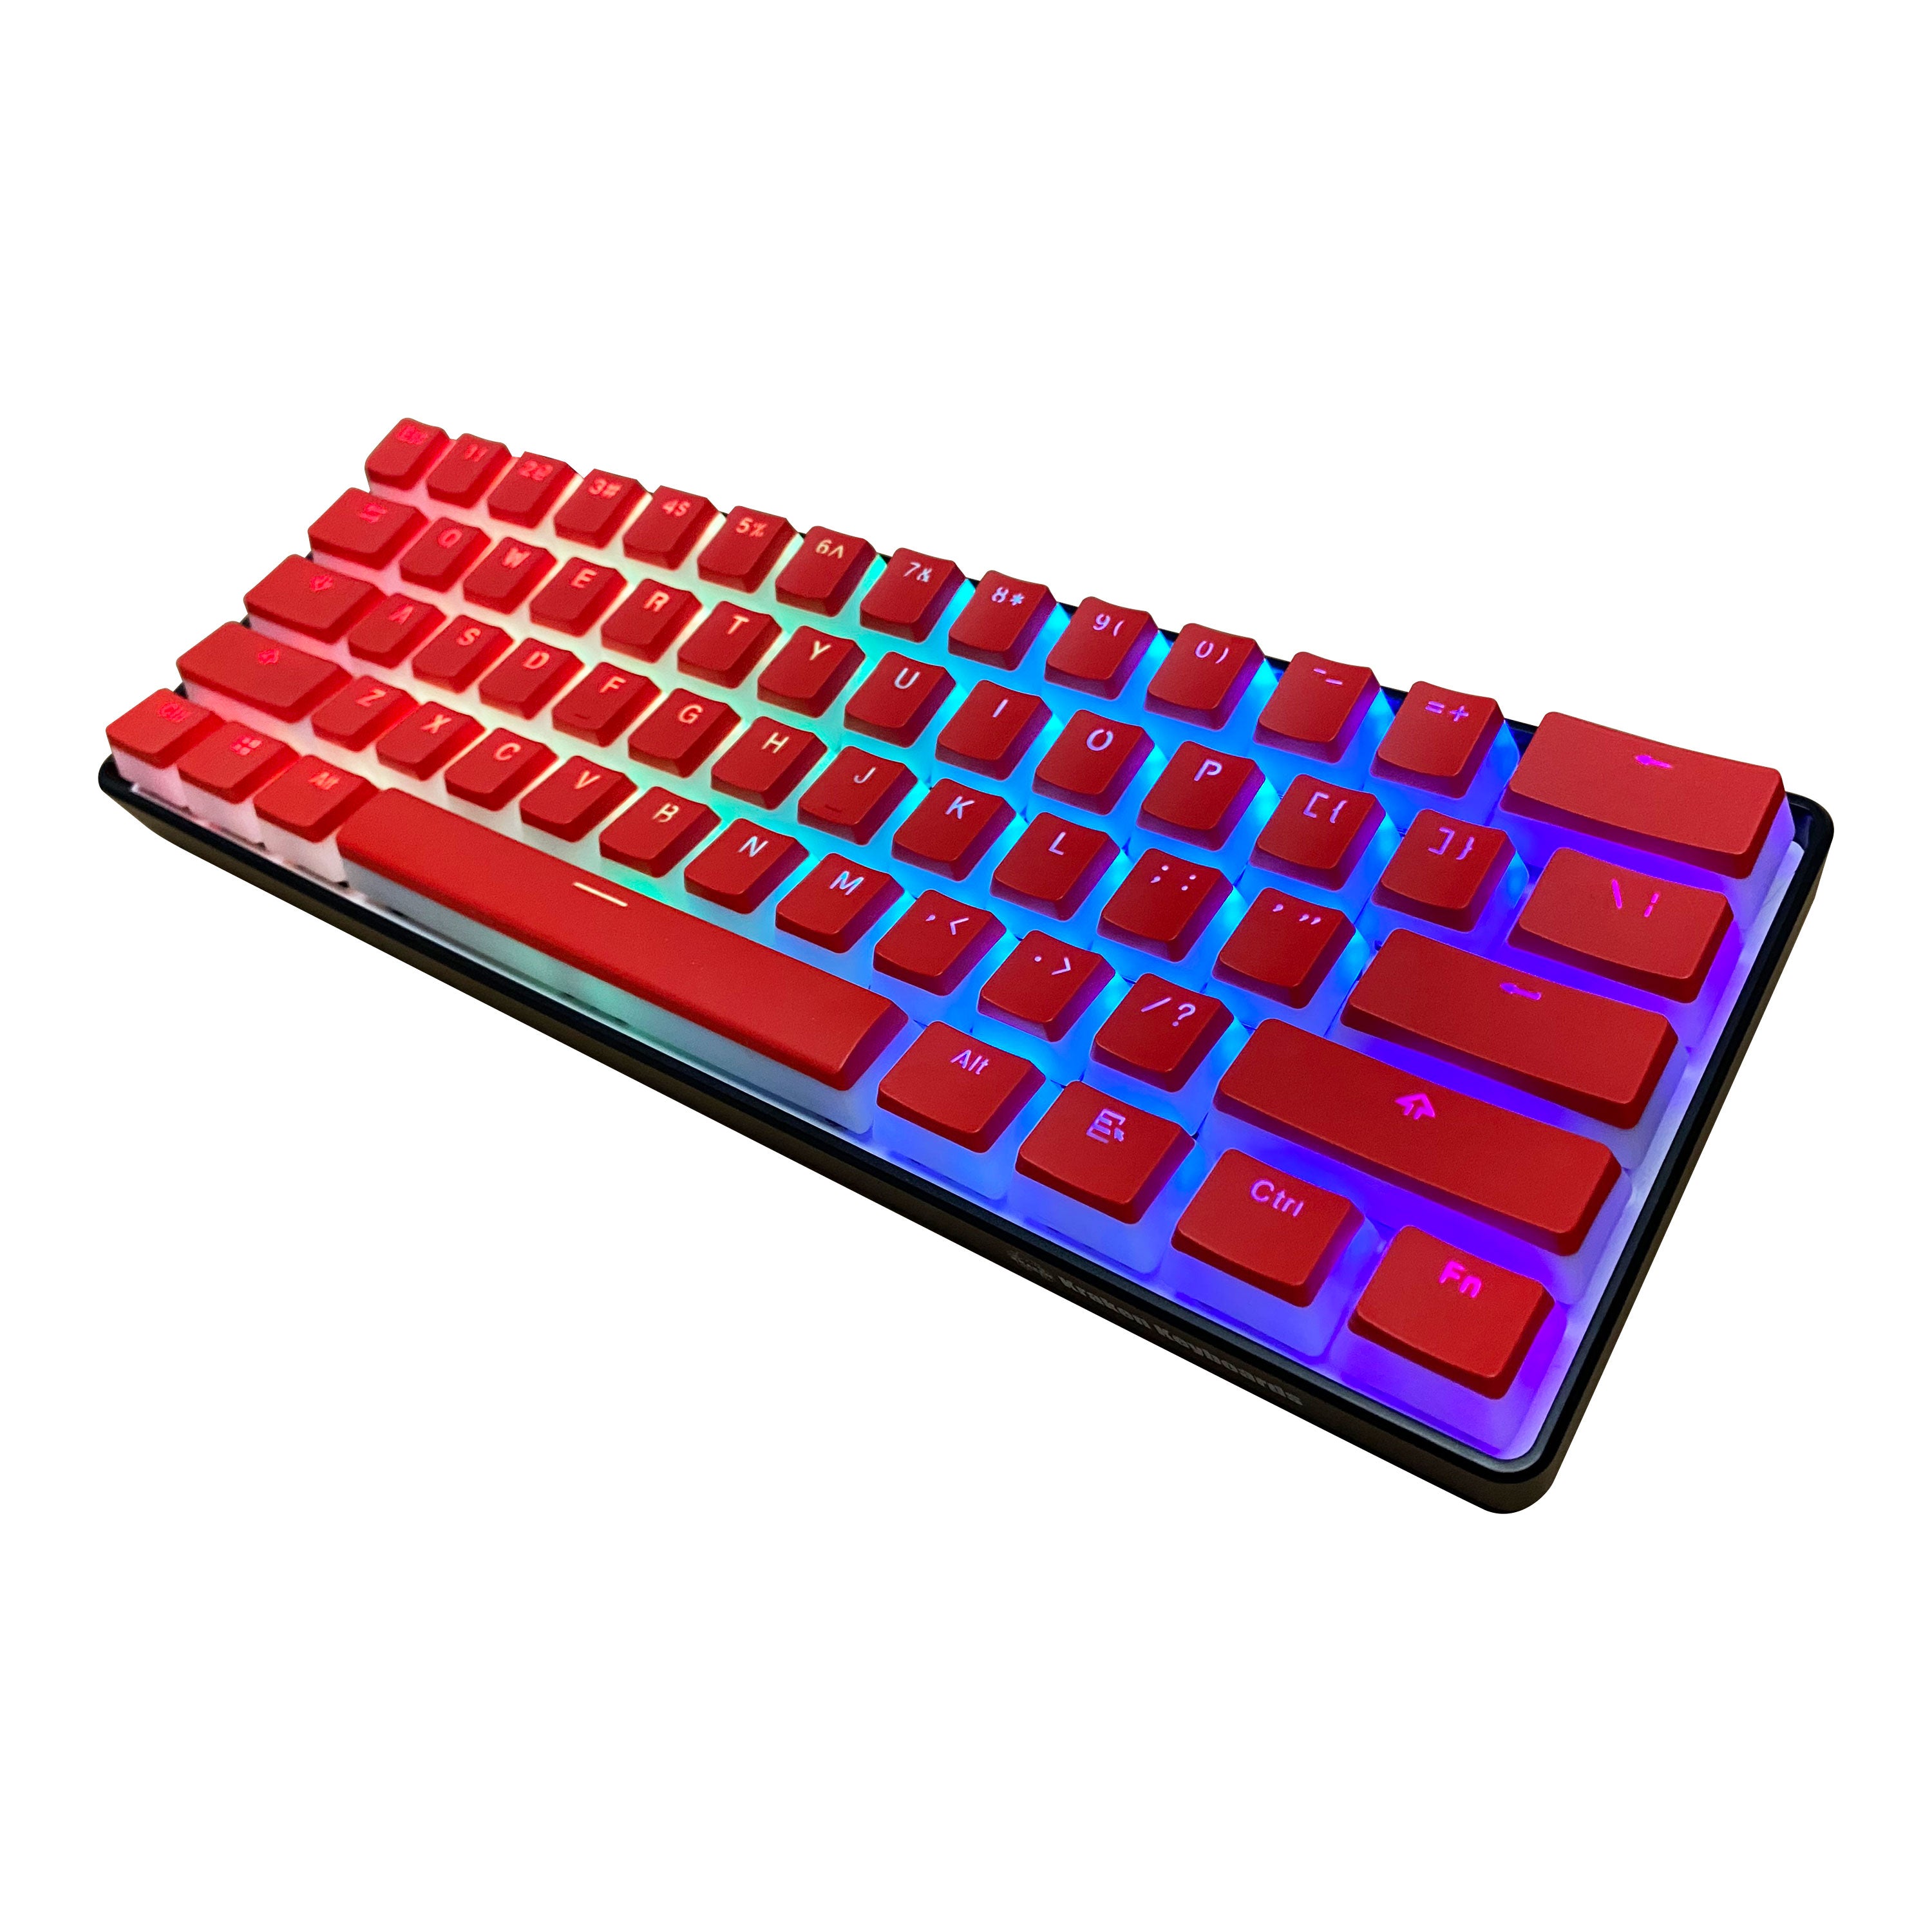 Red Pudding Keycap Set (ISO Keys included)